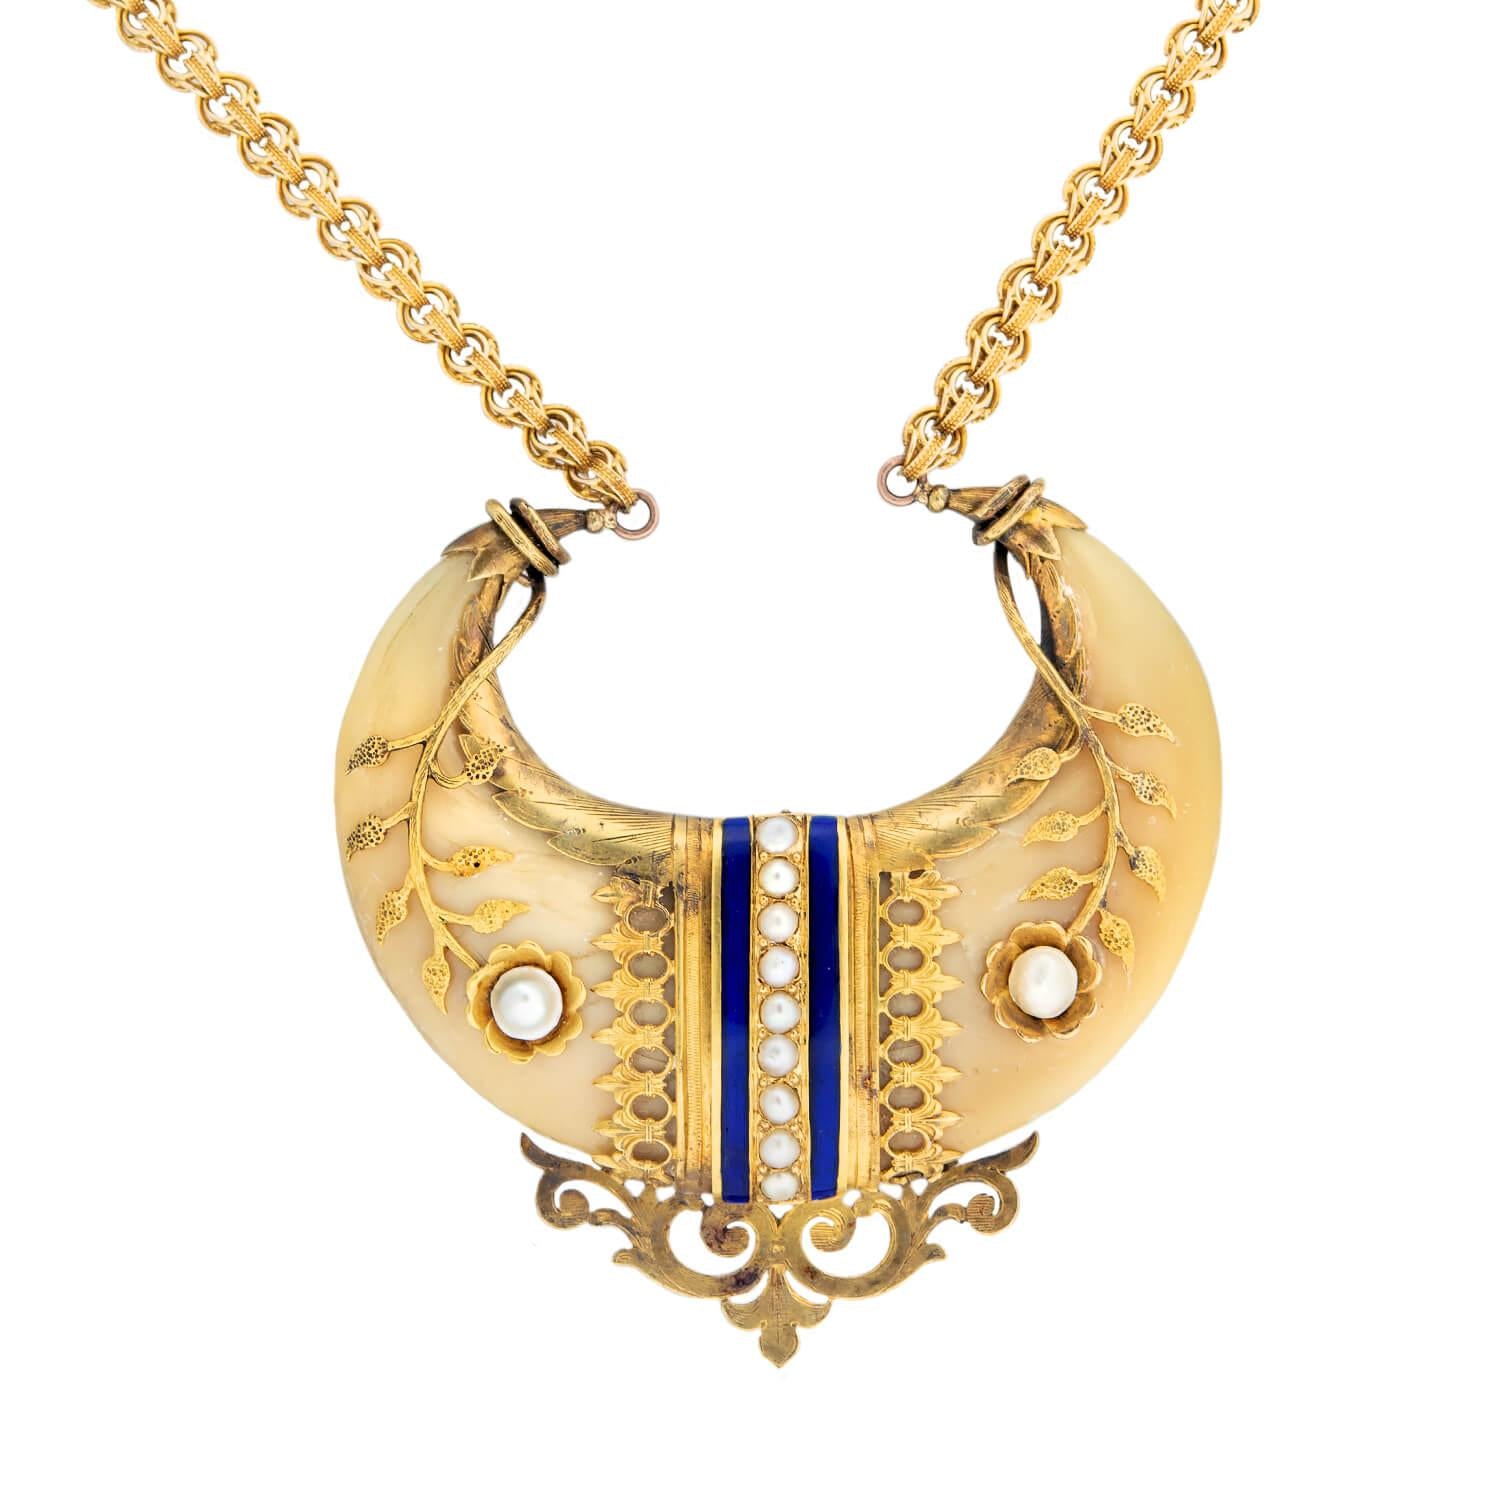 Victorian 14k Pearl Enameled Double Tiger Claw Pendant Necklace